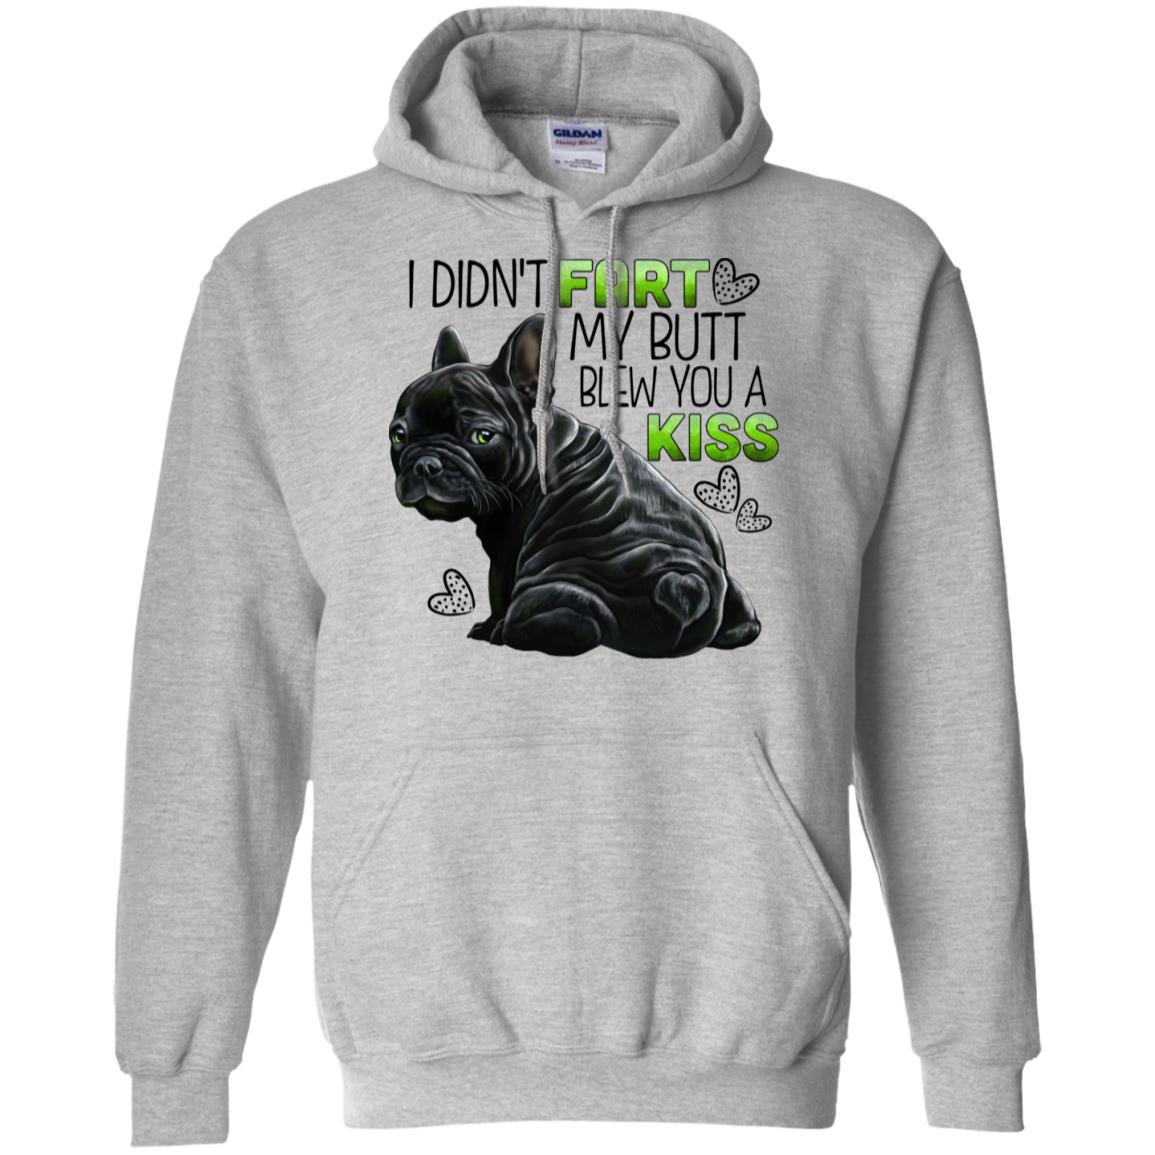 Black French bulldog Funny Hoodie, I didn't fart my butt blew you a kiss - GoneBold.gift